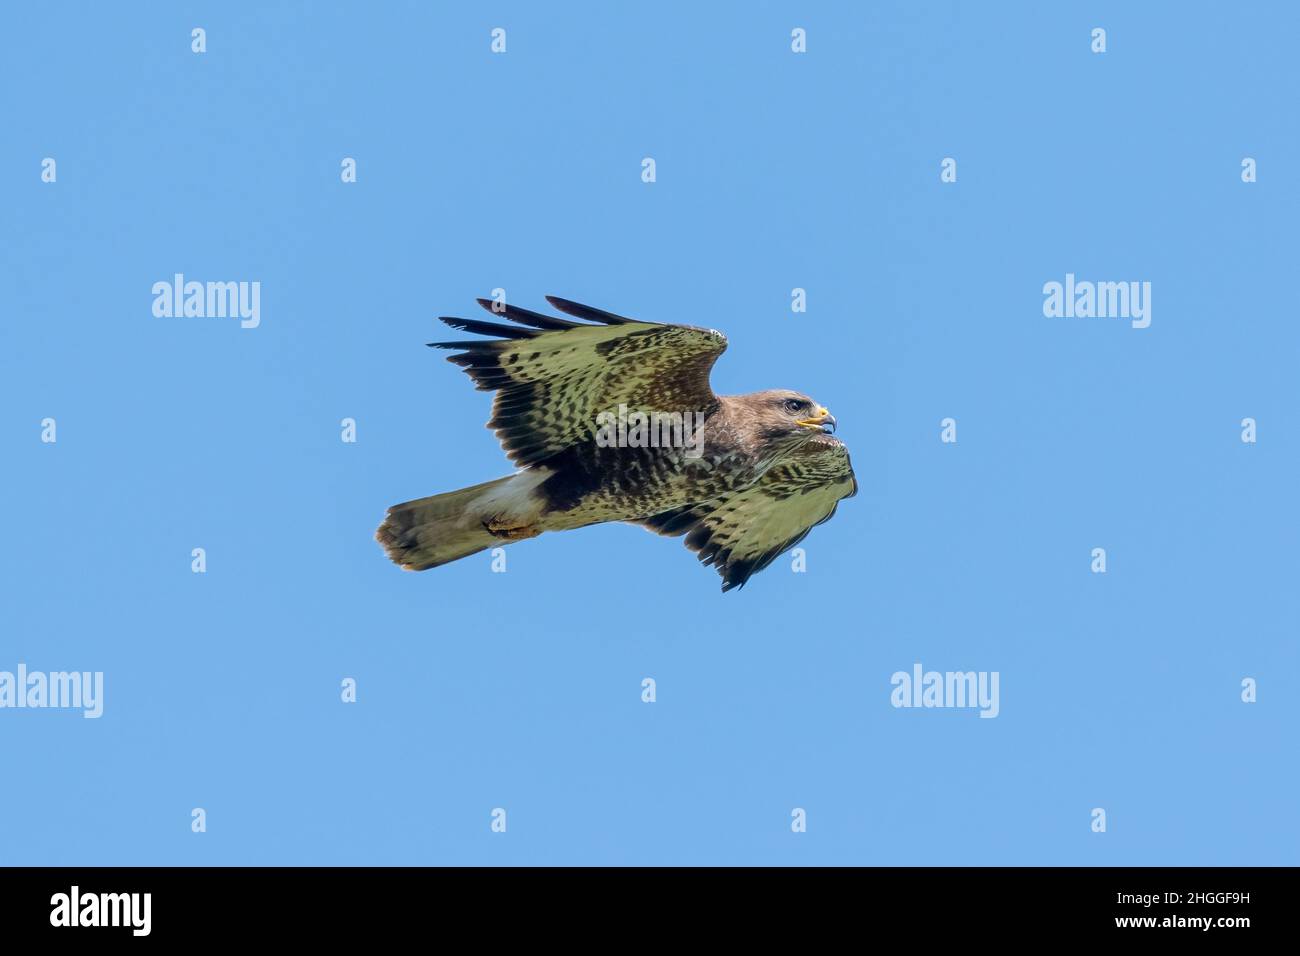 These images were taken in North Hykeham, Lincoln, UK. LINCOLN, UK: GLORIOUS pictures of a buzzard flying in broad sunshine have been captured. One im Stock Photo